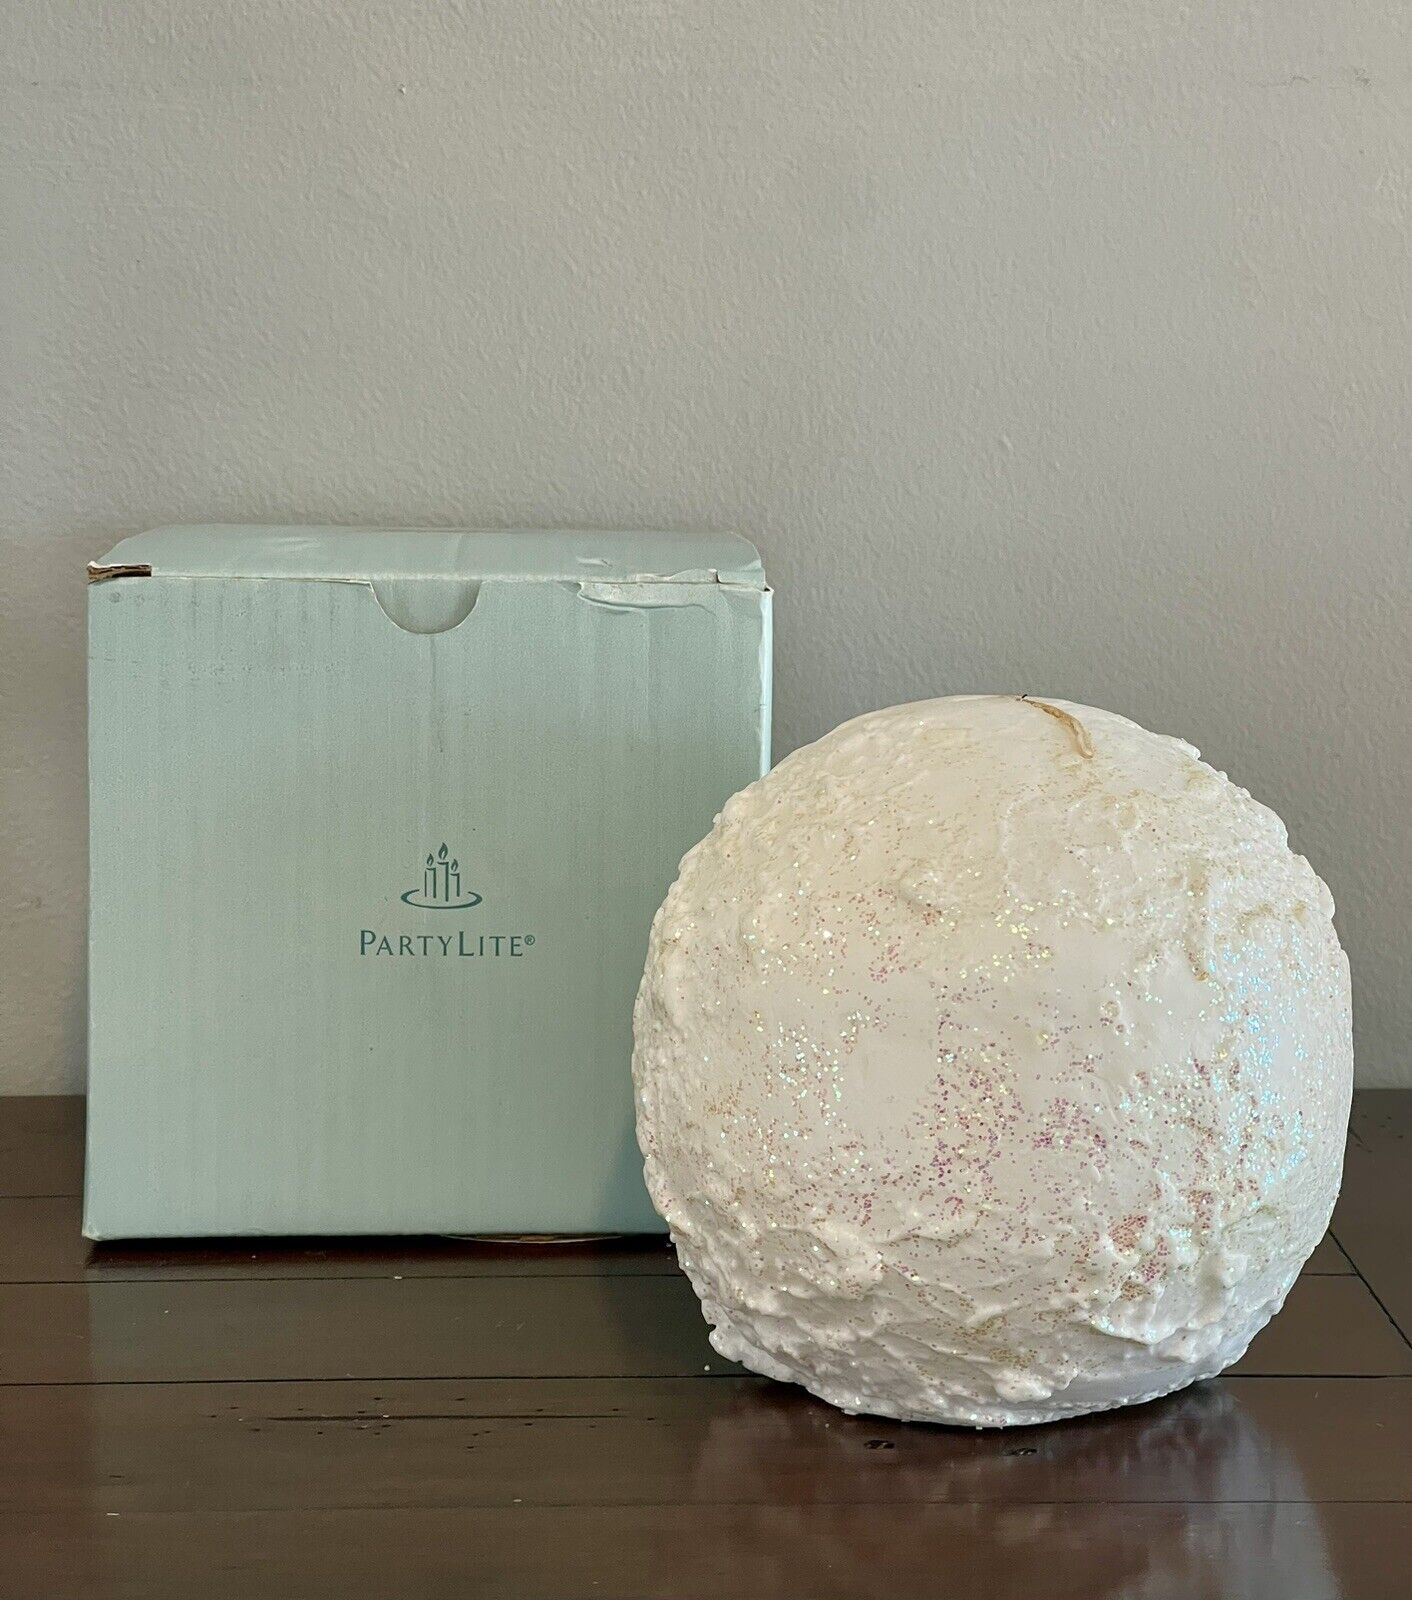 Partylite 6” Glitter Snowball Candle With Box And Tissue